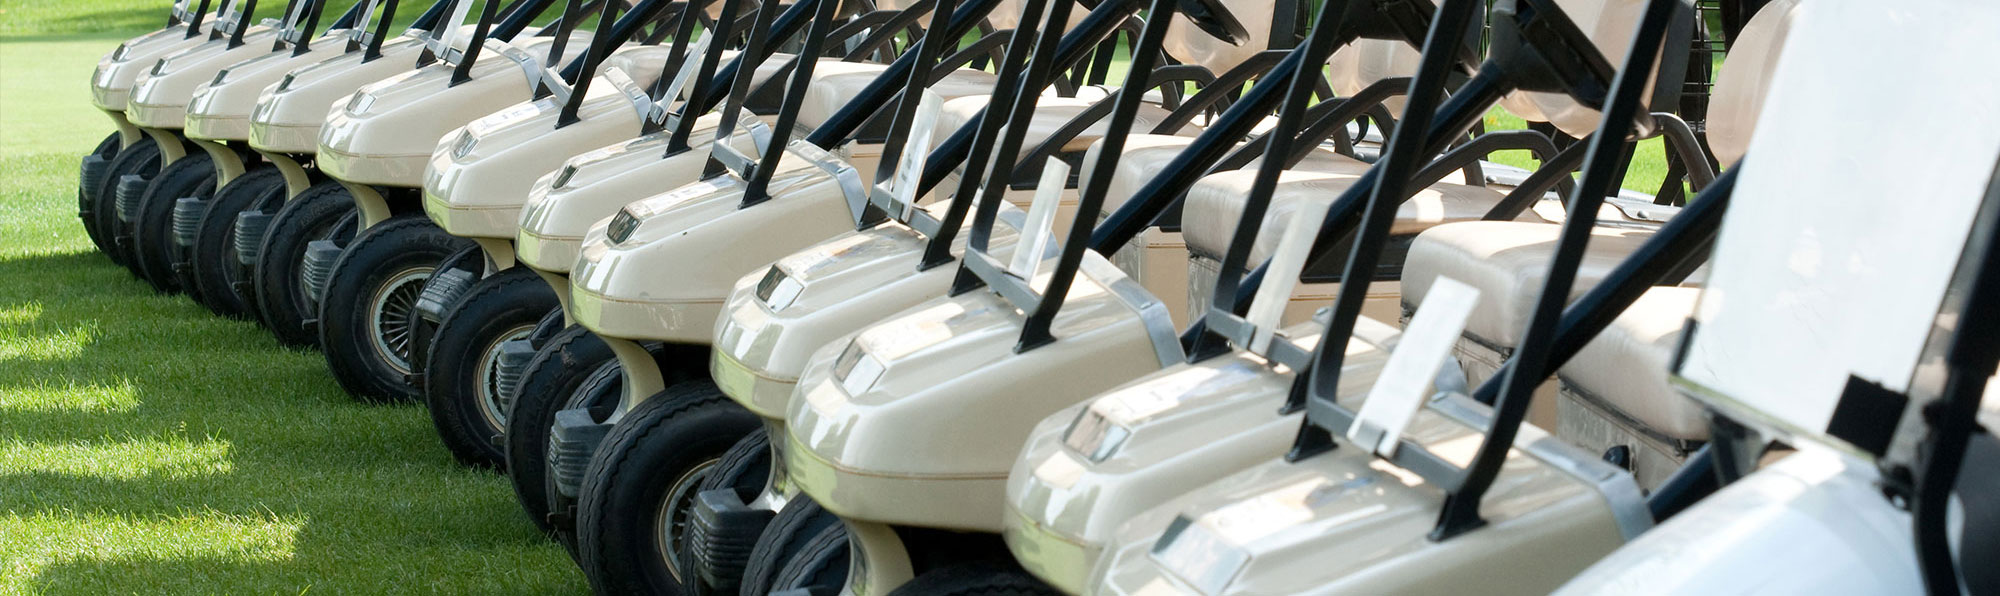 Lineup of White Golf Carts